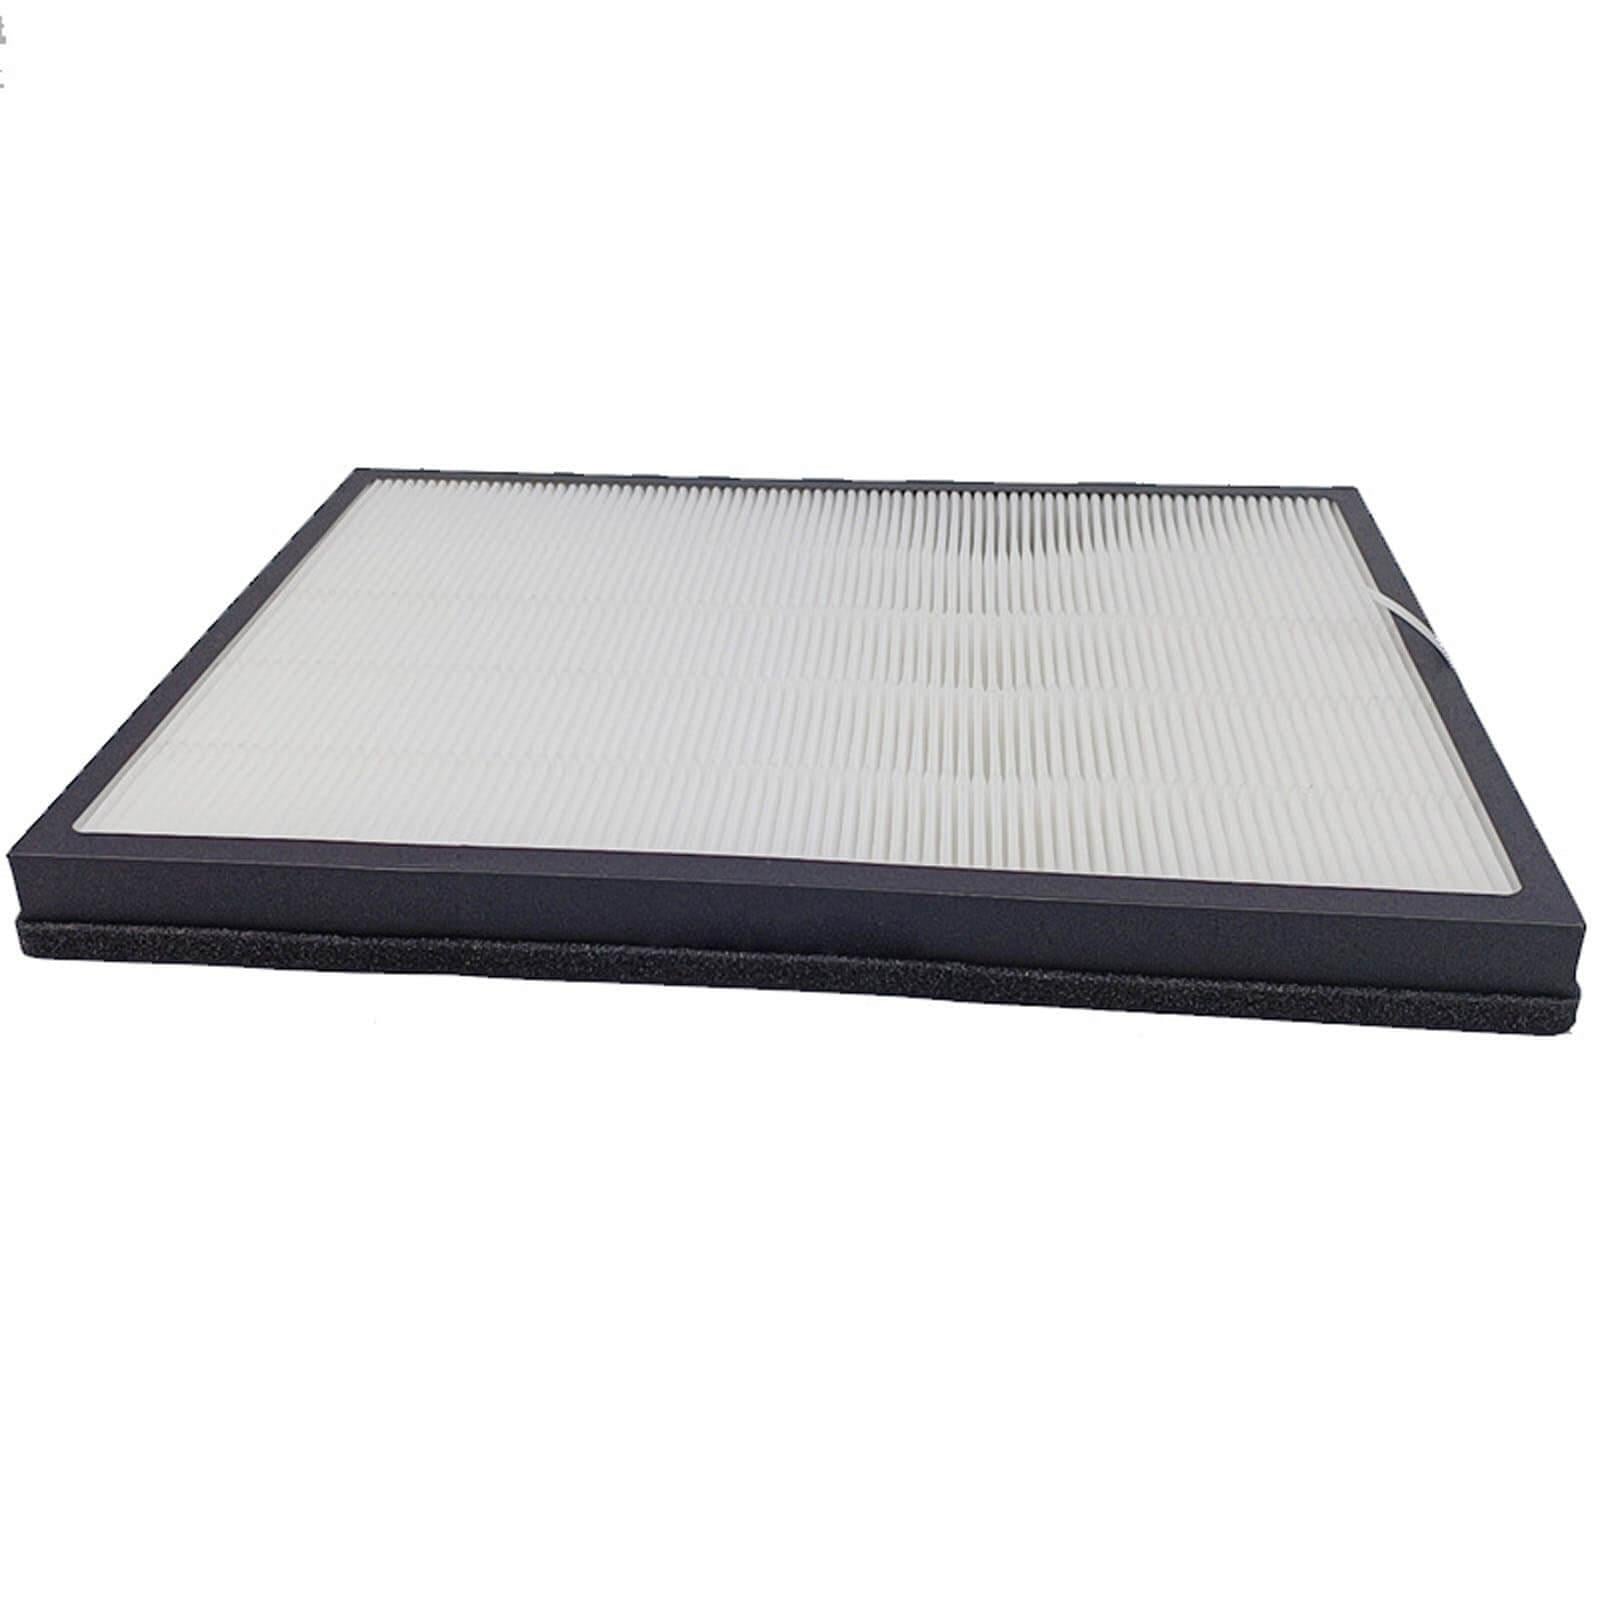 FY1413 FY1410 Filters for Philips 1000 Series AC1215 AC1214 Sparesbarn